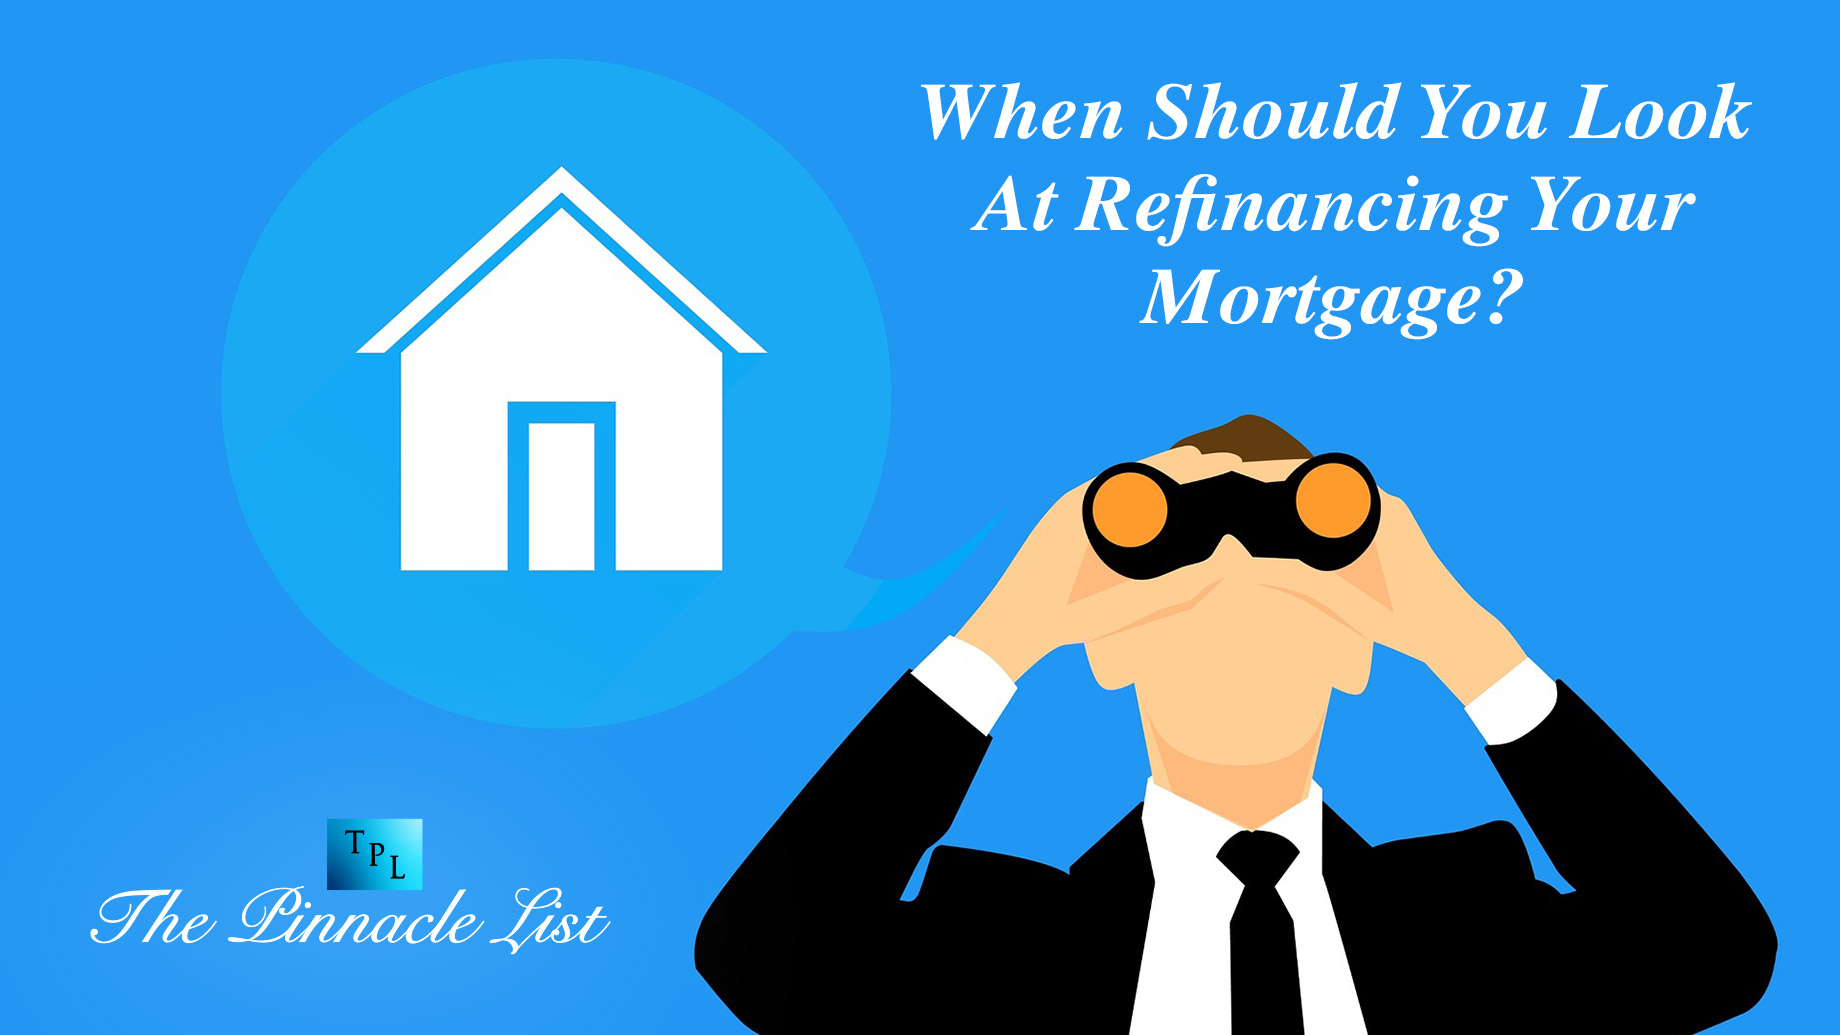 When Should You Look At Refinancing Your Mortgage?